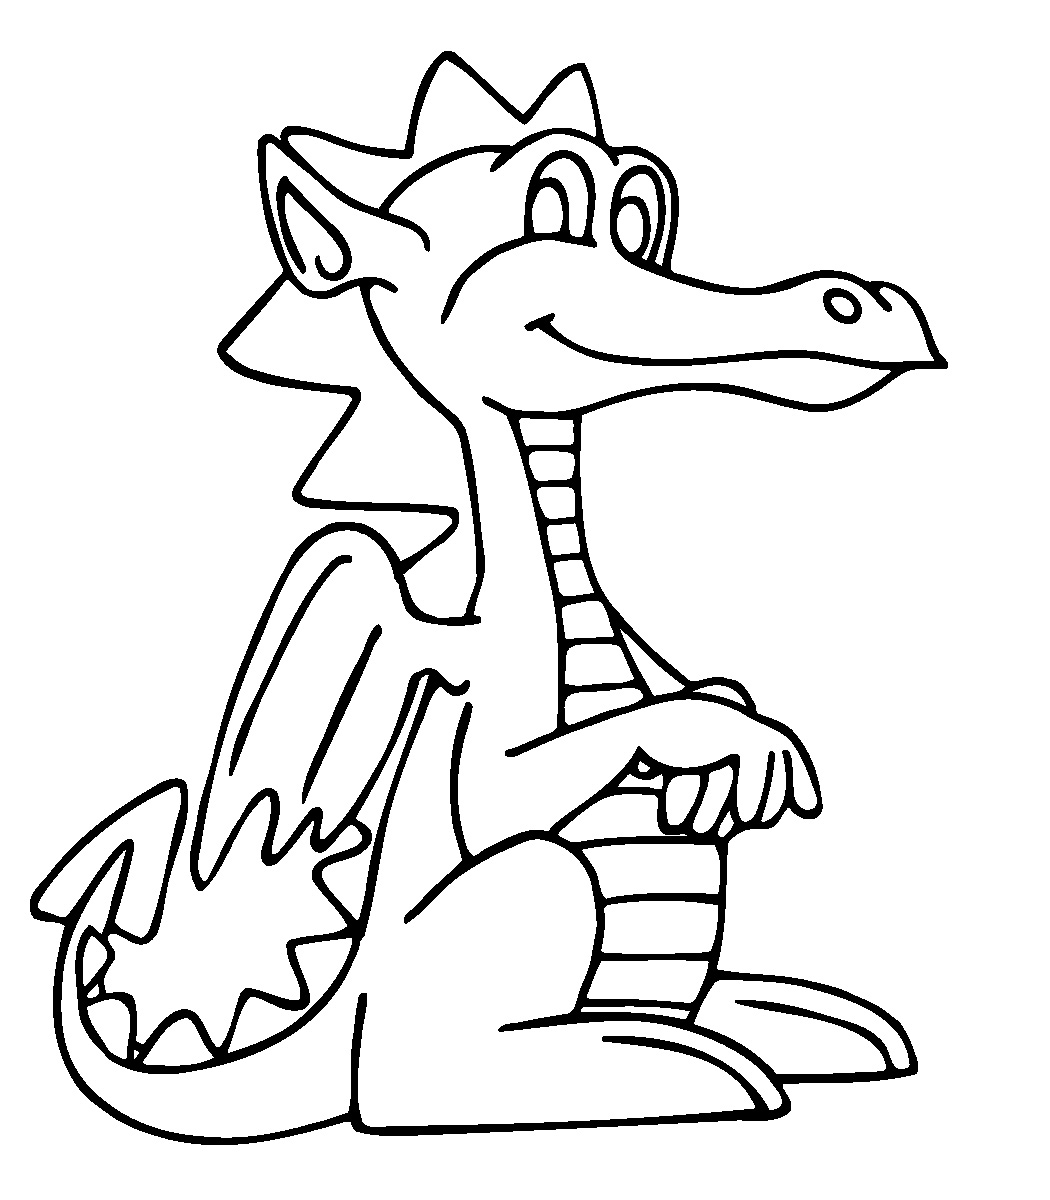 Pictures Of Cartoon Dragons - Cliparts.co